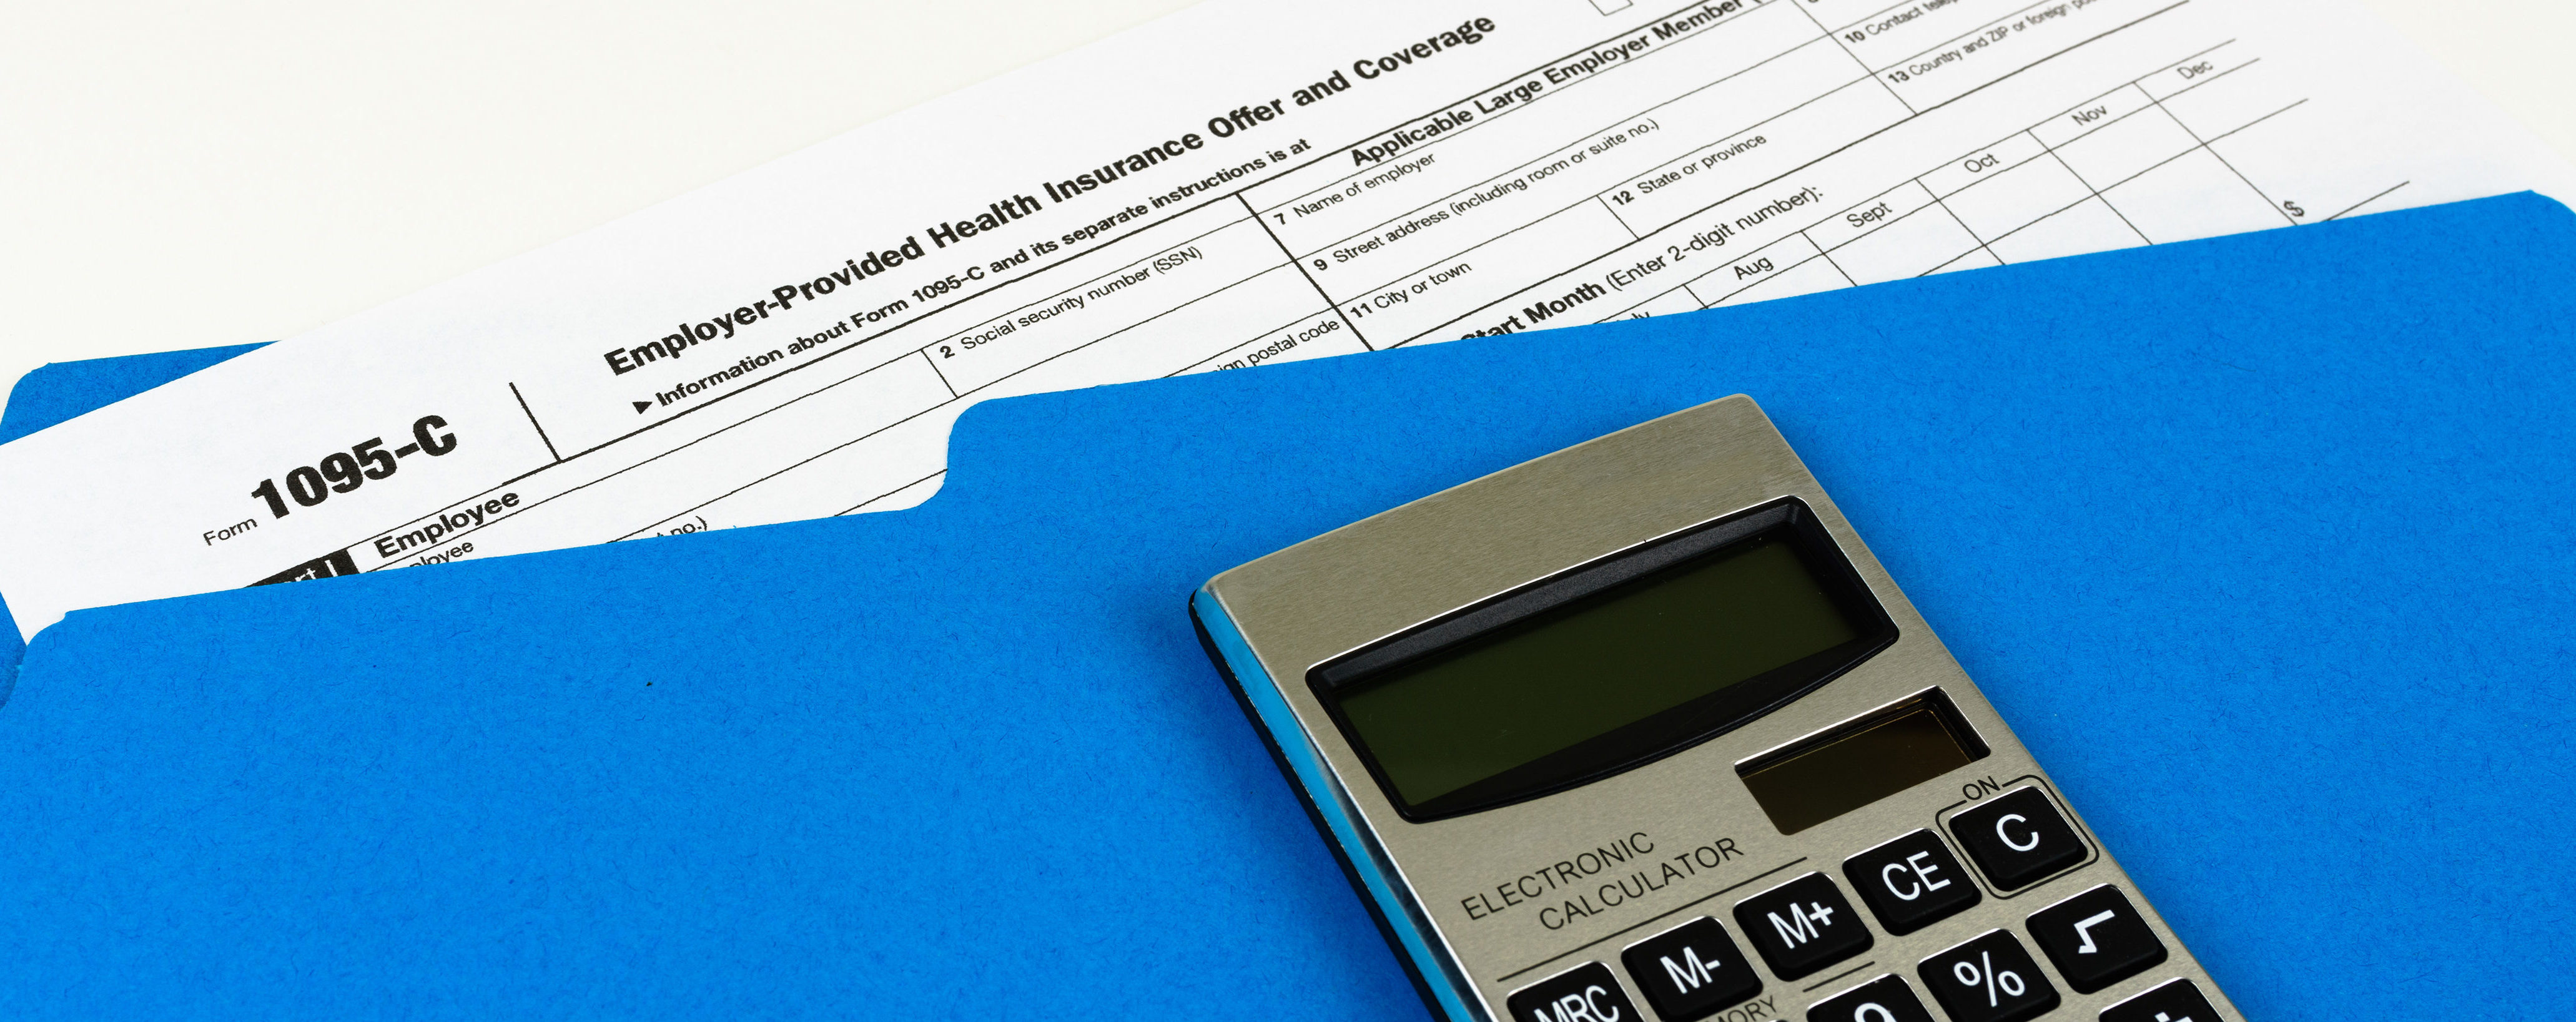 IRS Extends Deadline to Supply ACA Forms to Employees